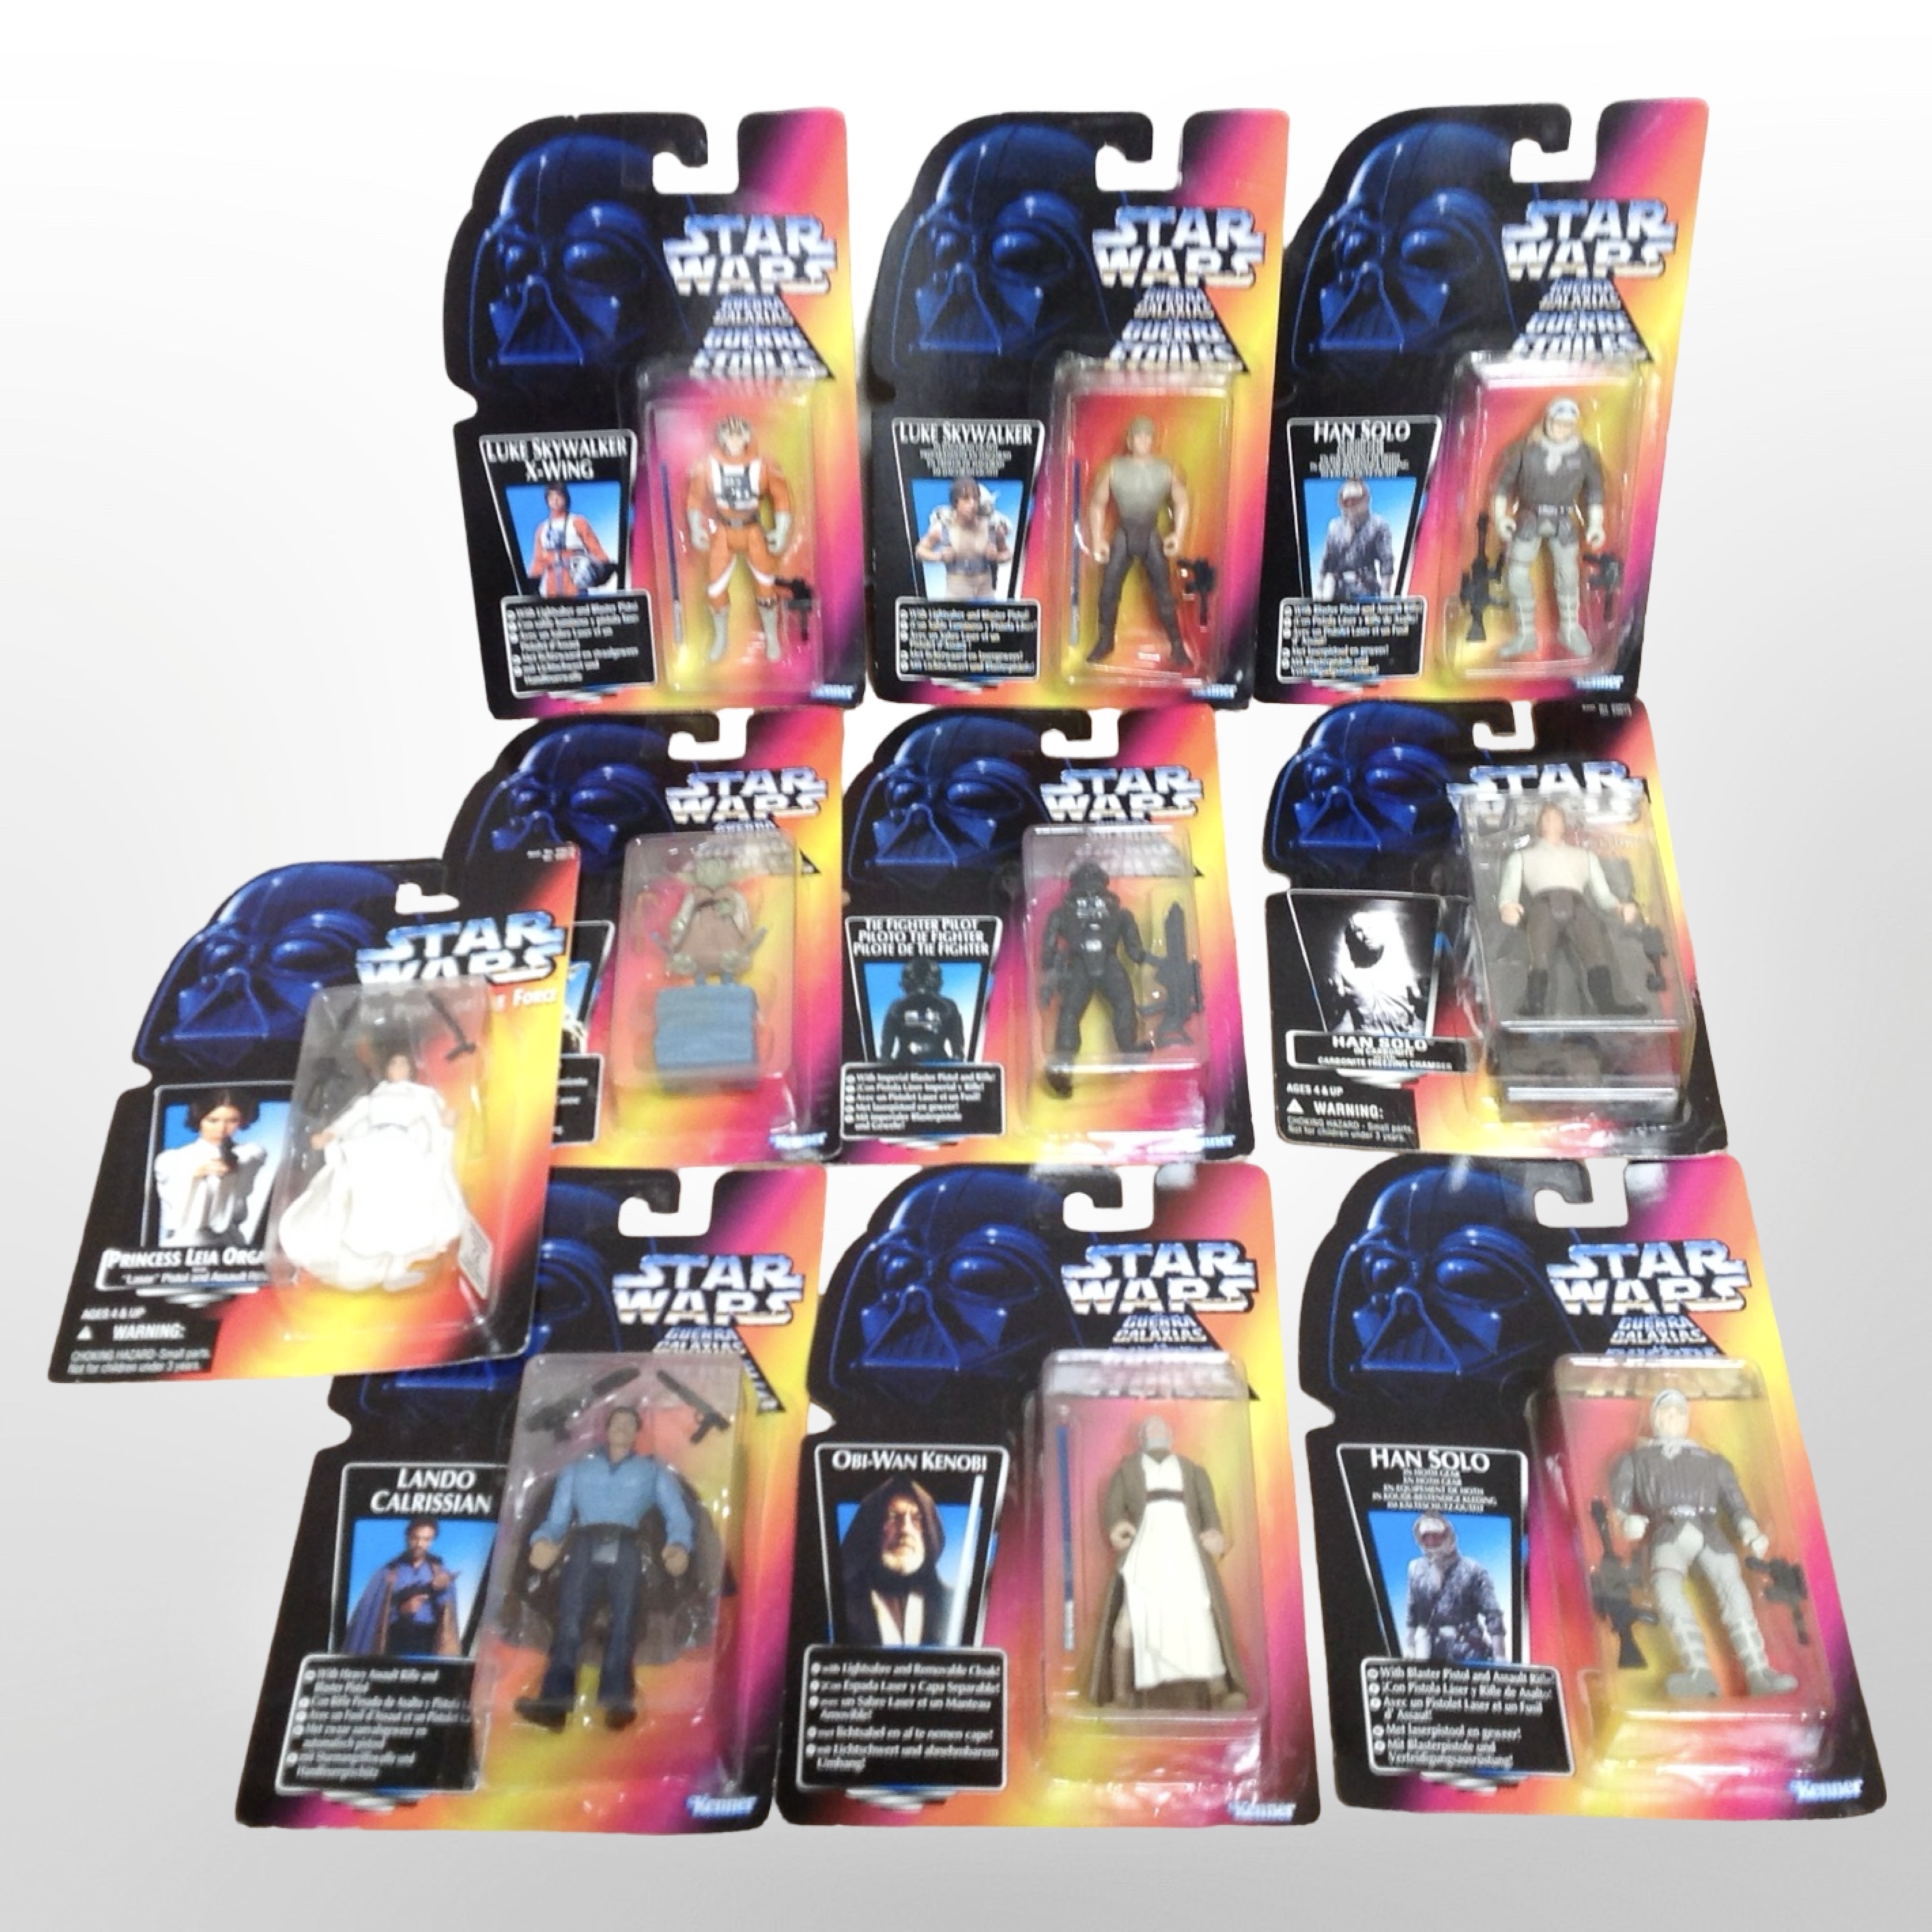 10 Kenner Star Wars figurines, boxed.